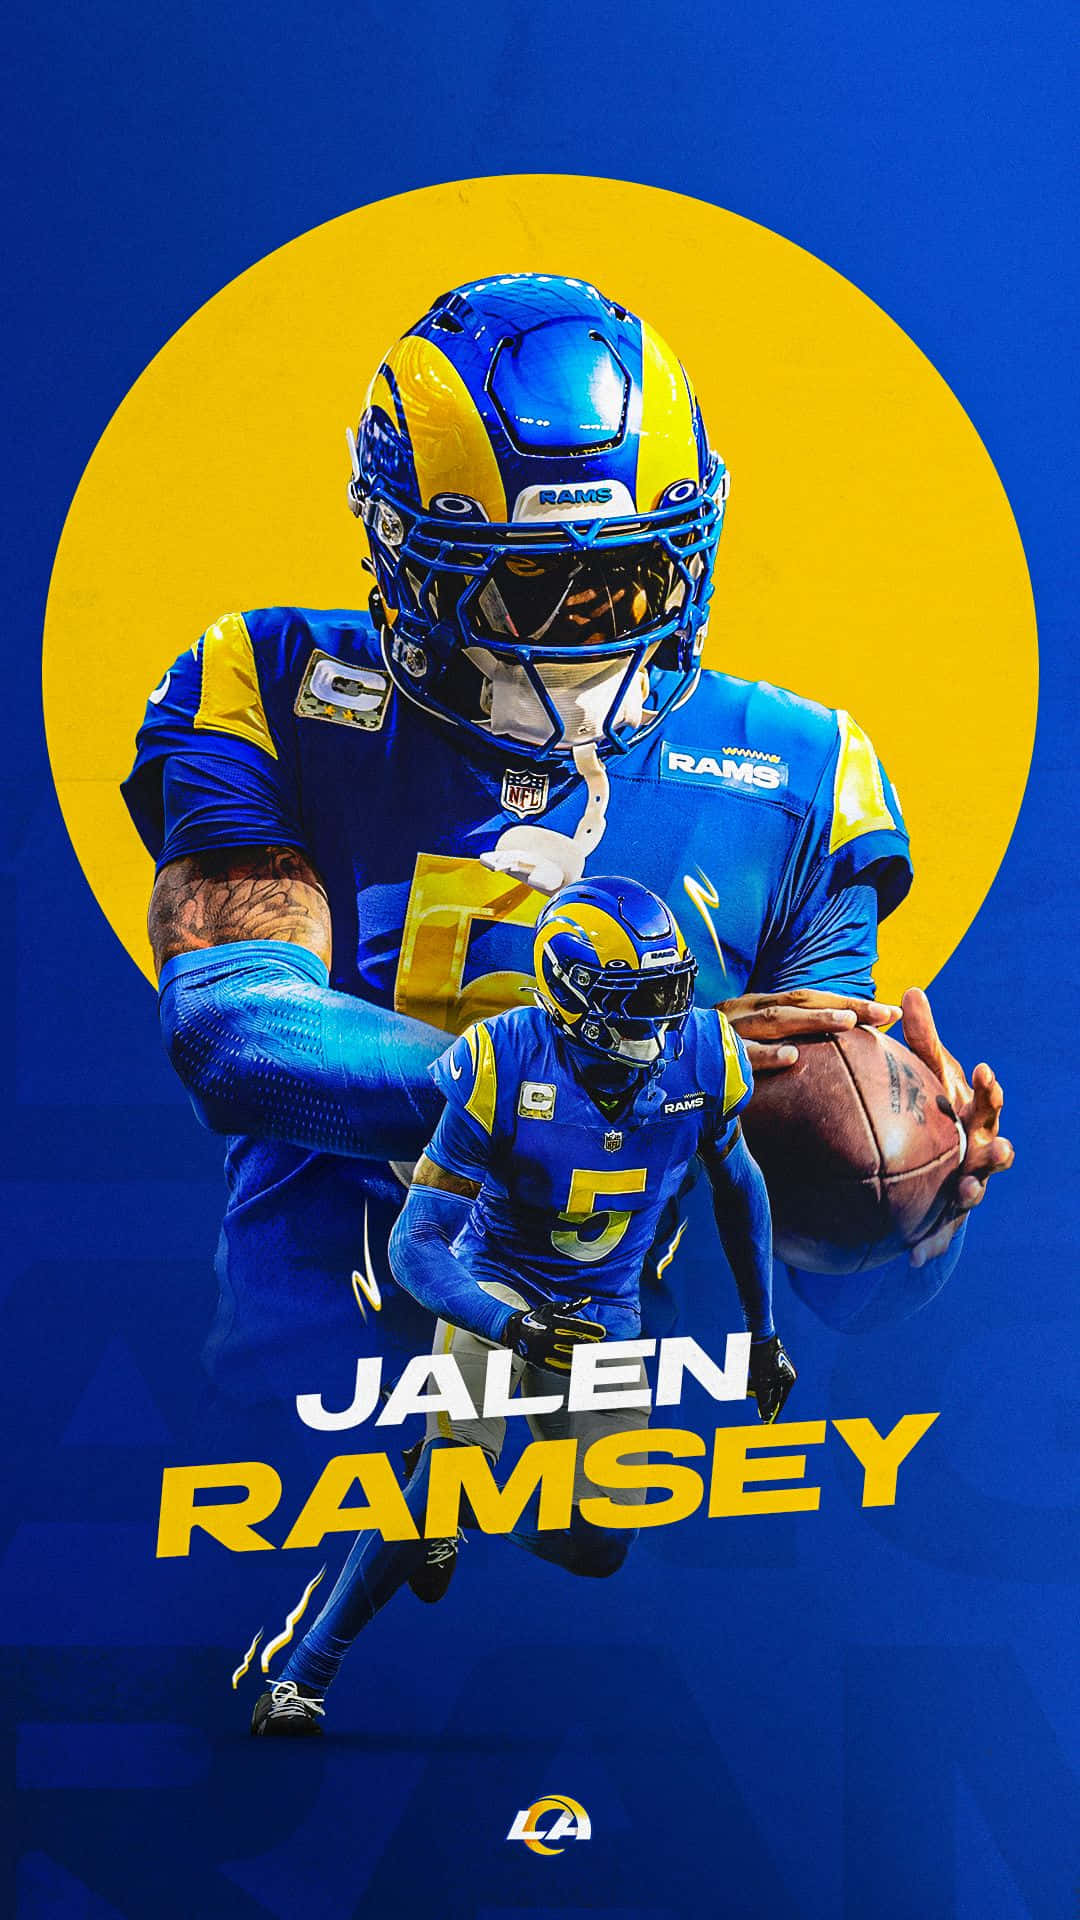 Los Angeles Rams on Twitter Step 1 Identify the best DB in the league  Step 2 Put him on a wallpaper jalenramsey x WallpaperWednesday  httpstcoQsUFmRzRHD  Twitter